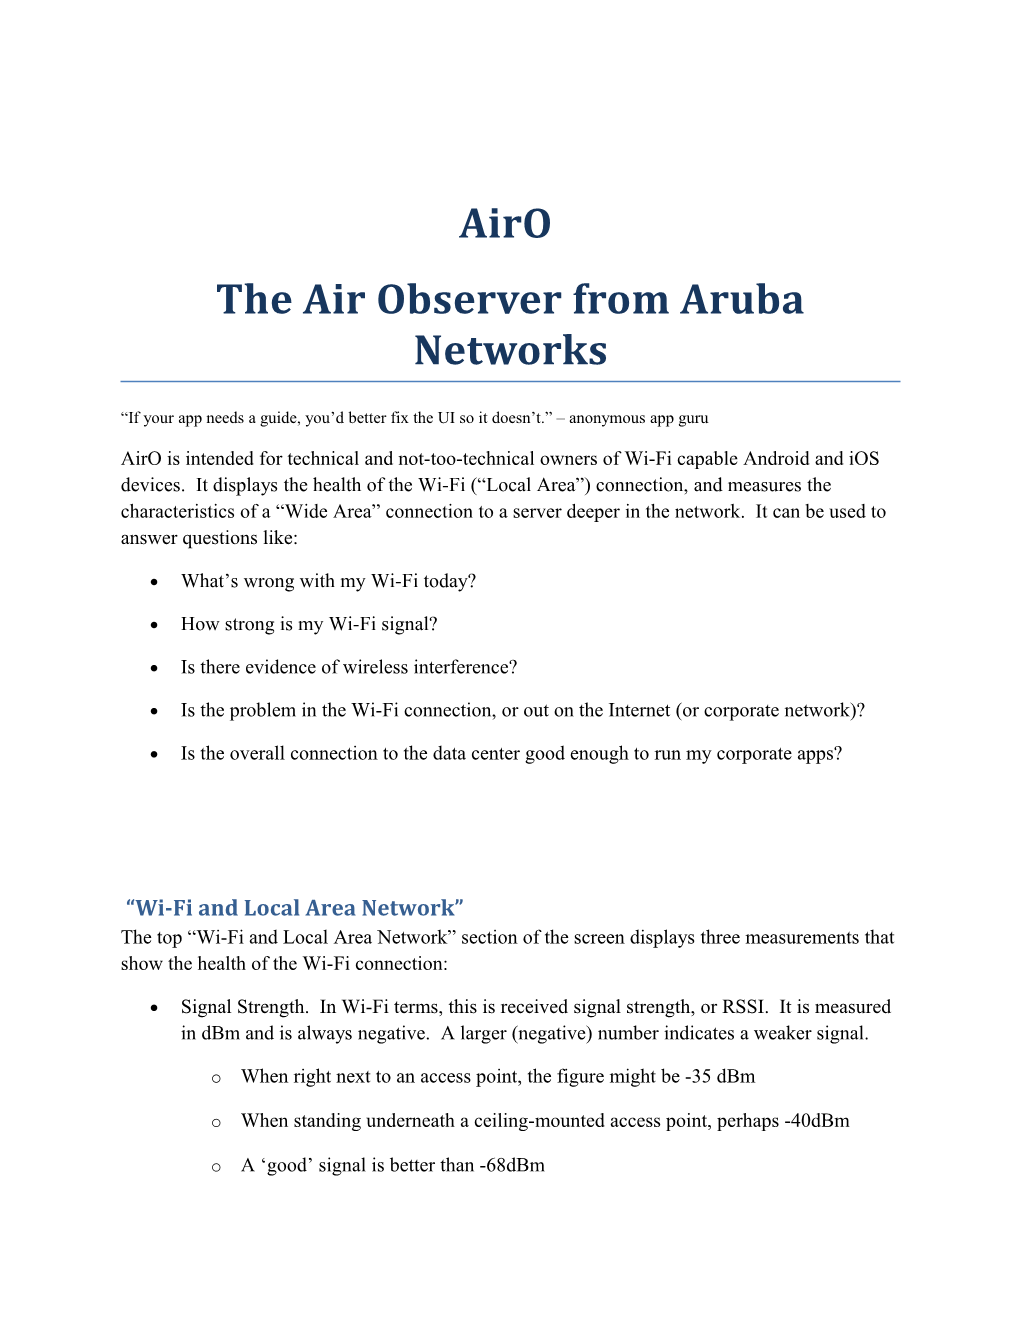 The Air Observer from Aruba Networks